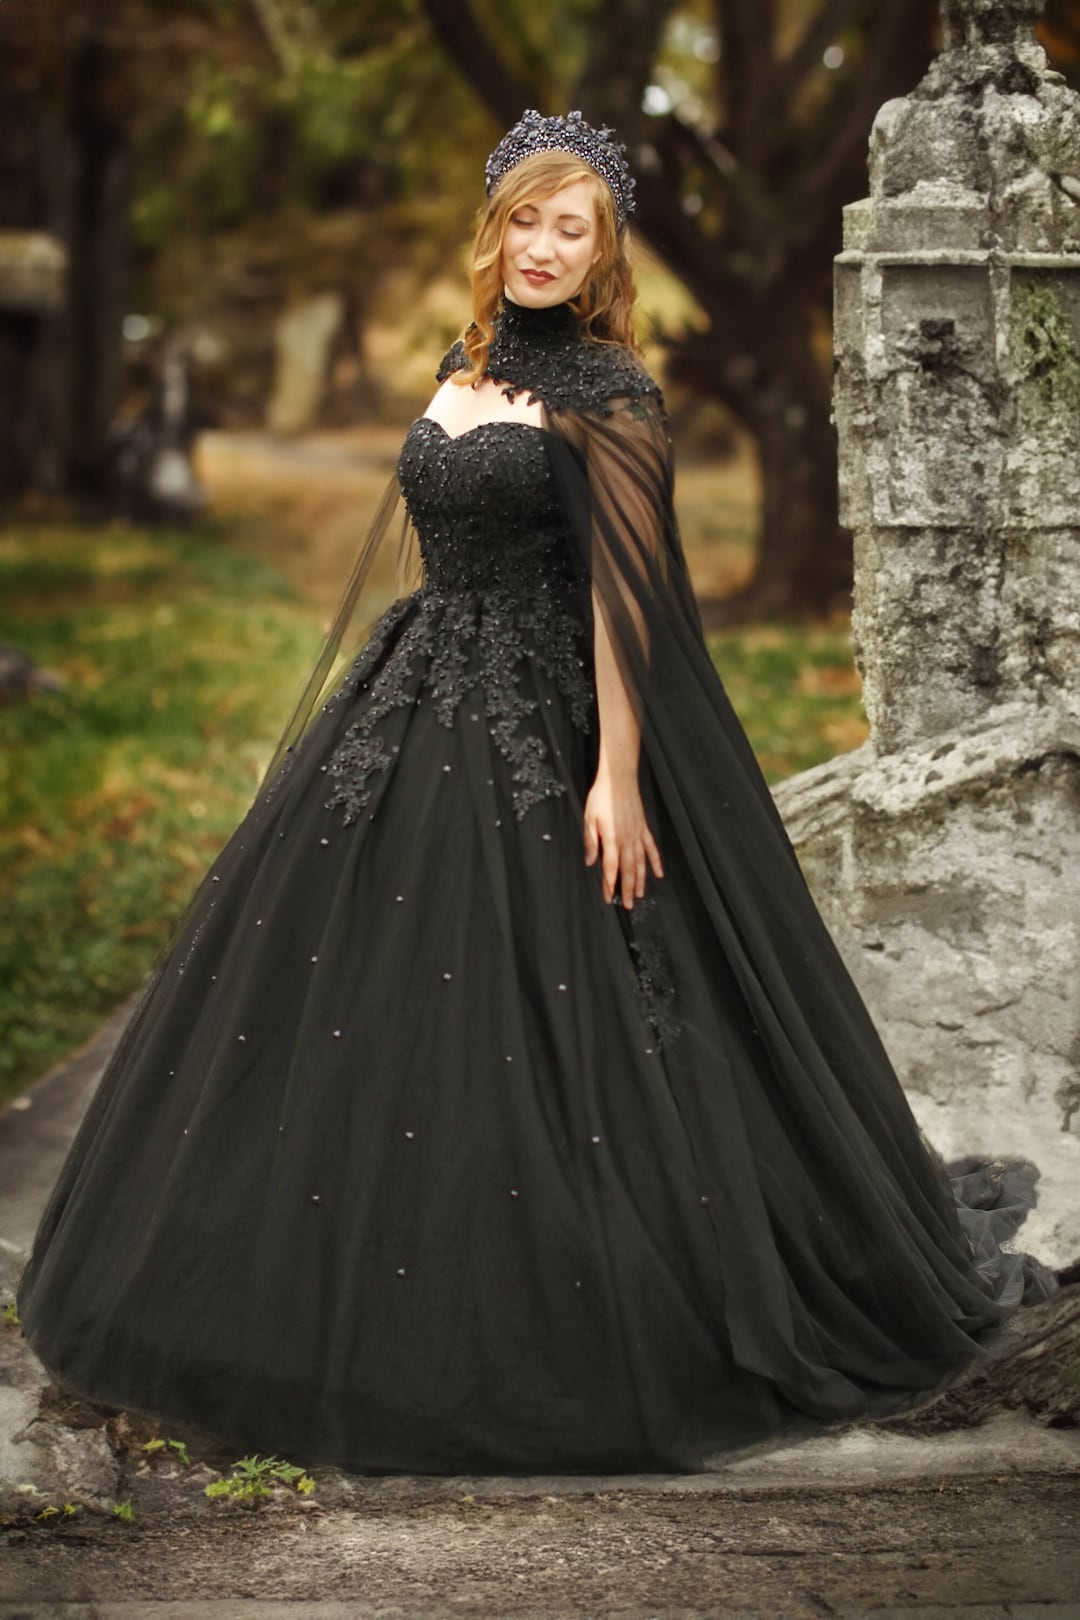 Sexy Modern Simple Vintage Black Wedding Dress With Long Sleeves Backless  Gown at Rs 17999 in Surat